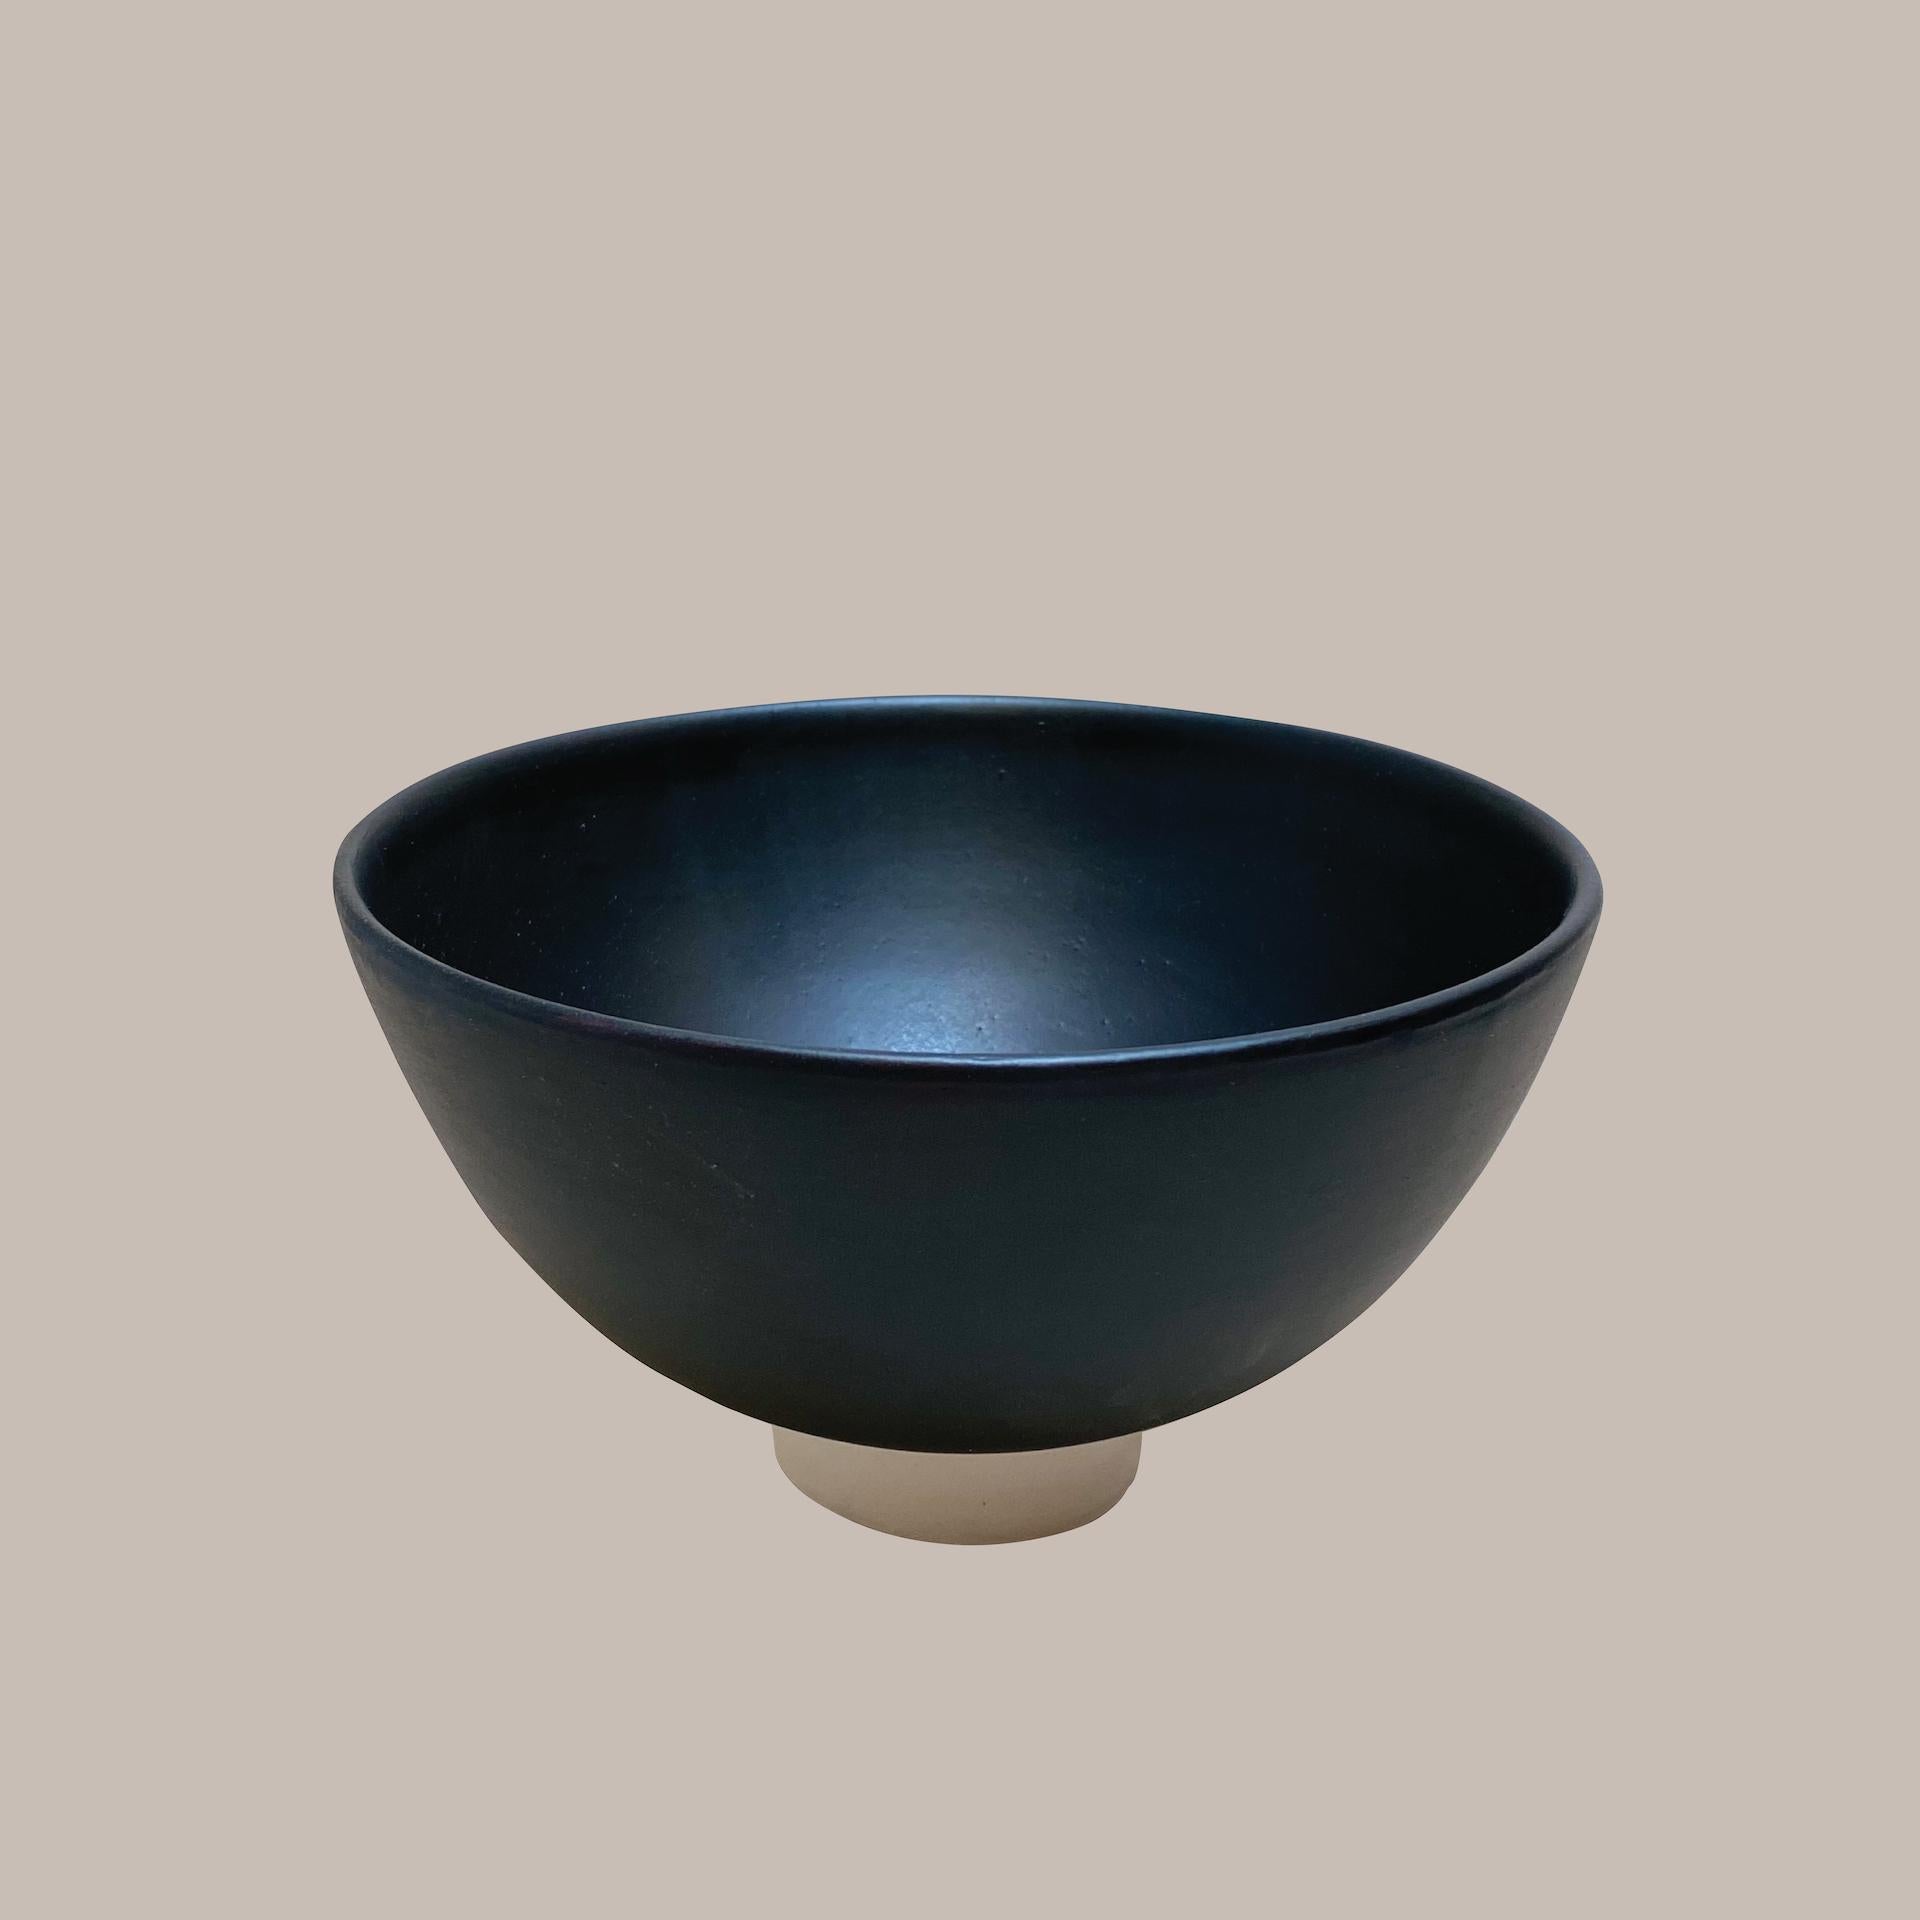 Ott Another Paradigmatic Handmade Ceramic High-Plate by Studio Yoon Seok-Hyeon In New Condition For Sale In Geneve, CH